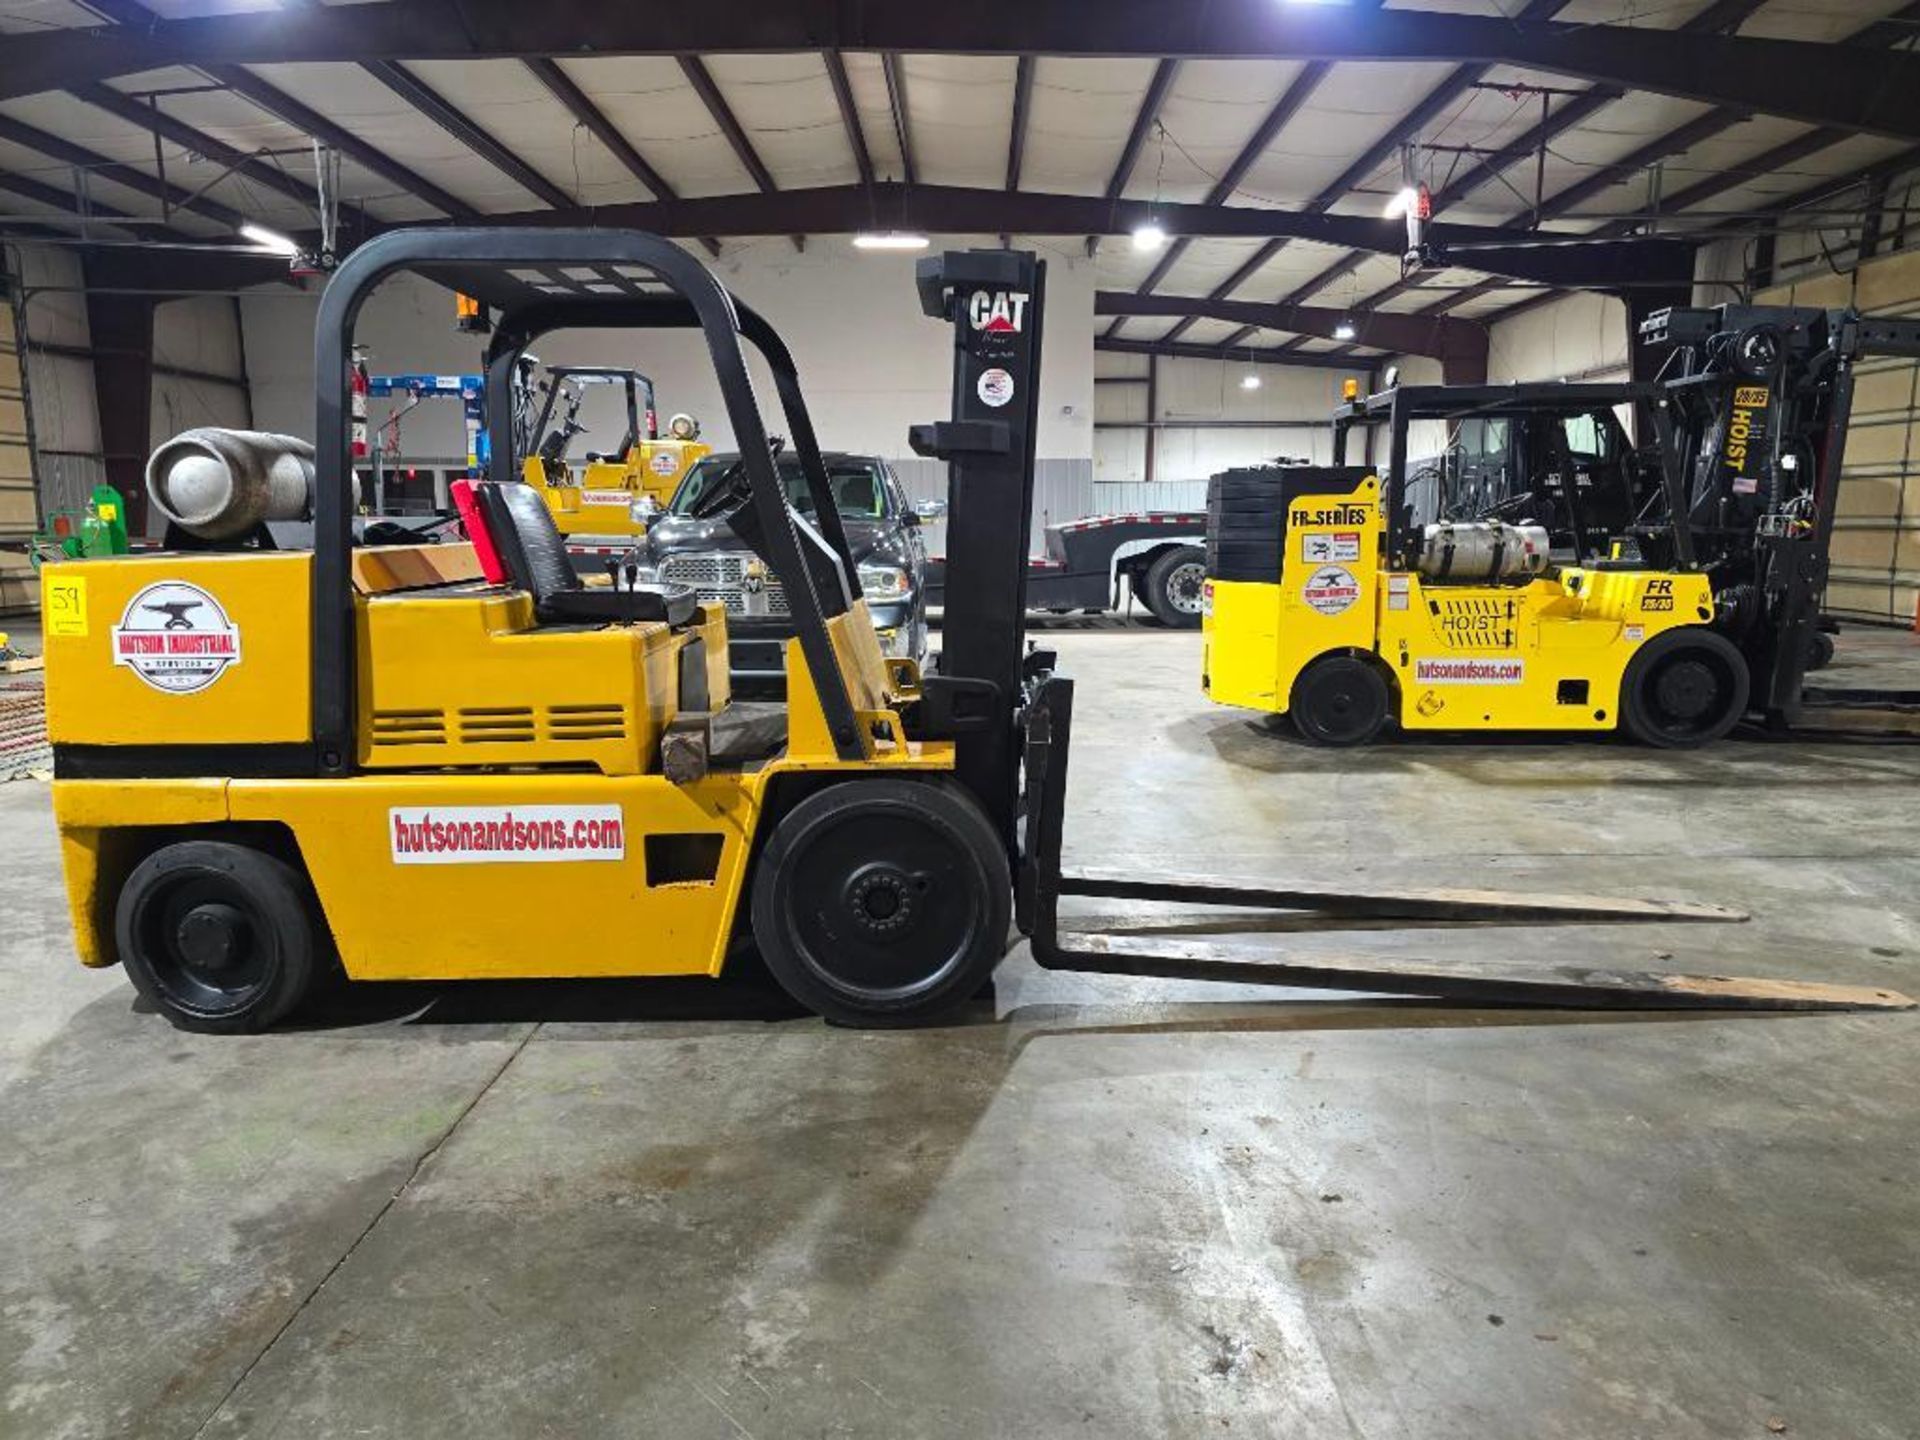 Caterpillar 12,500-LB. Capacity Forklift, Model T125D, LPG, Cushion Tires, 1,221 Hours, 2-Stage Mast - Image 6 of 12